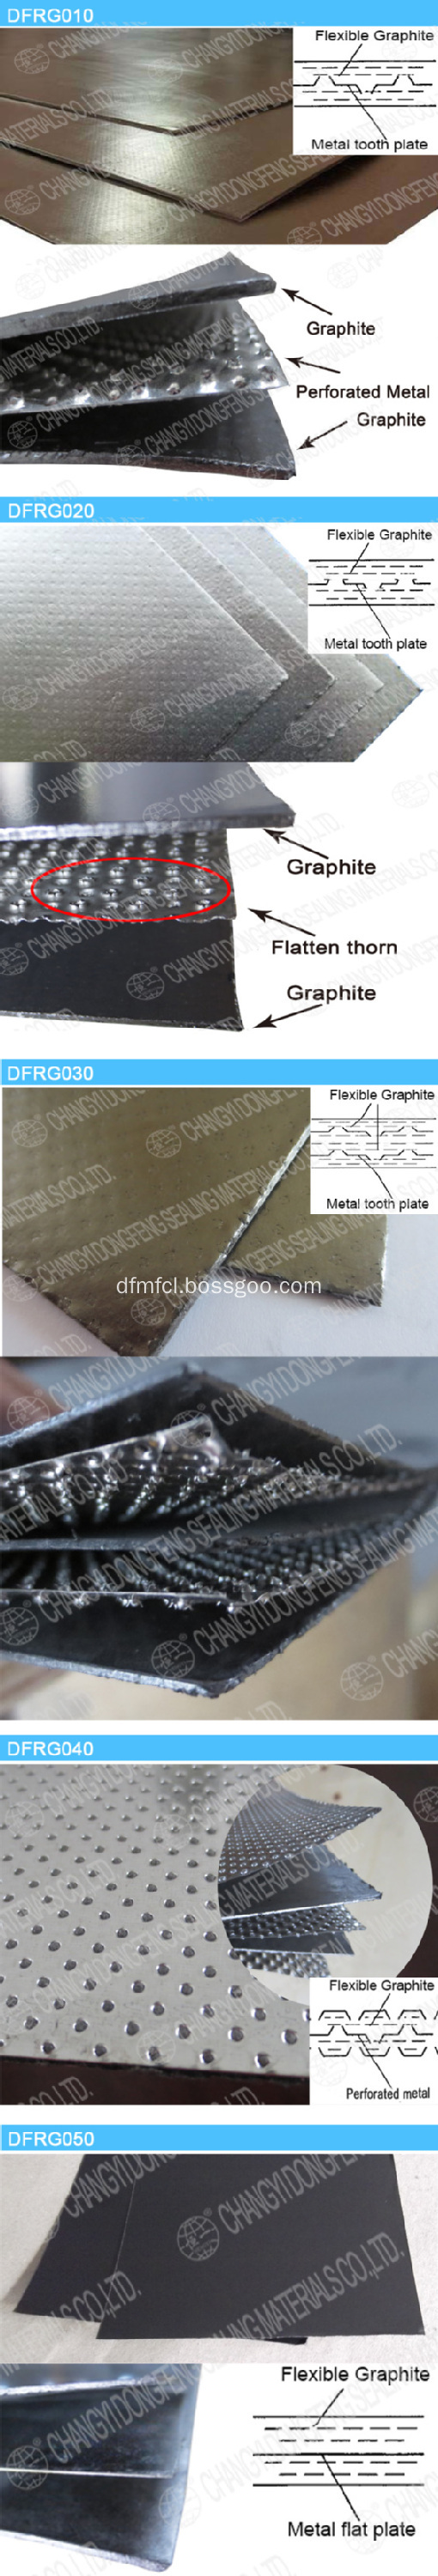 Reinforced Graphite Sheet with Tanged S.S316L